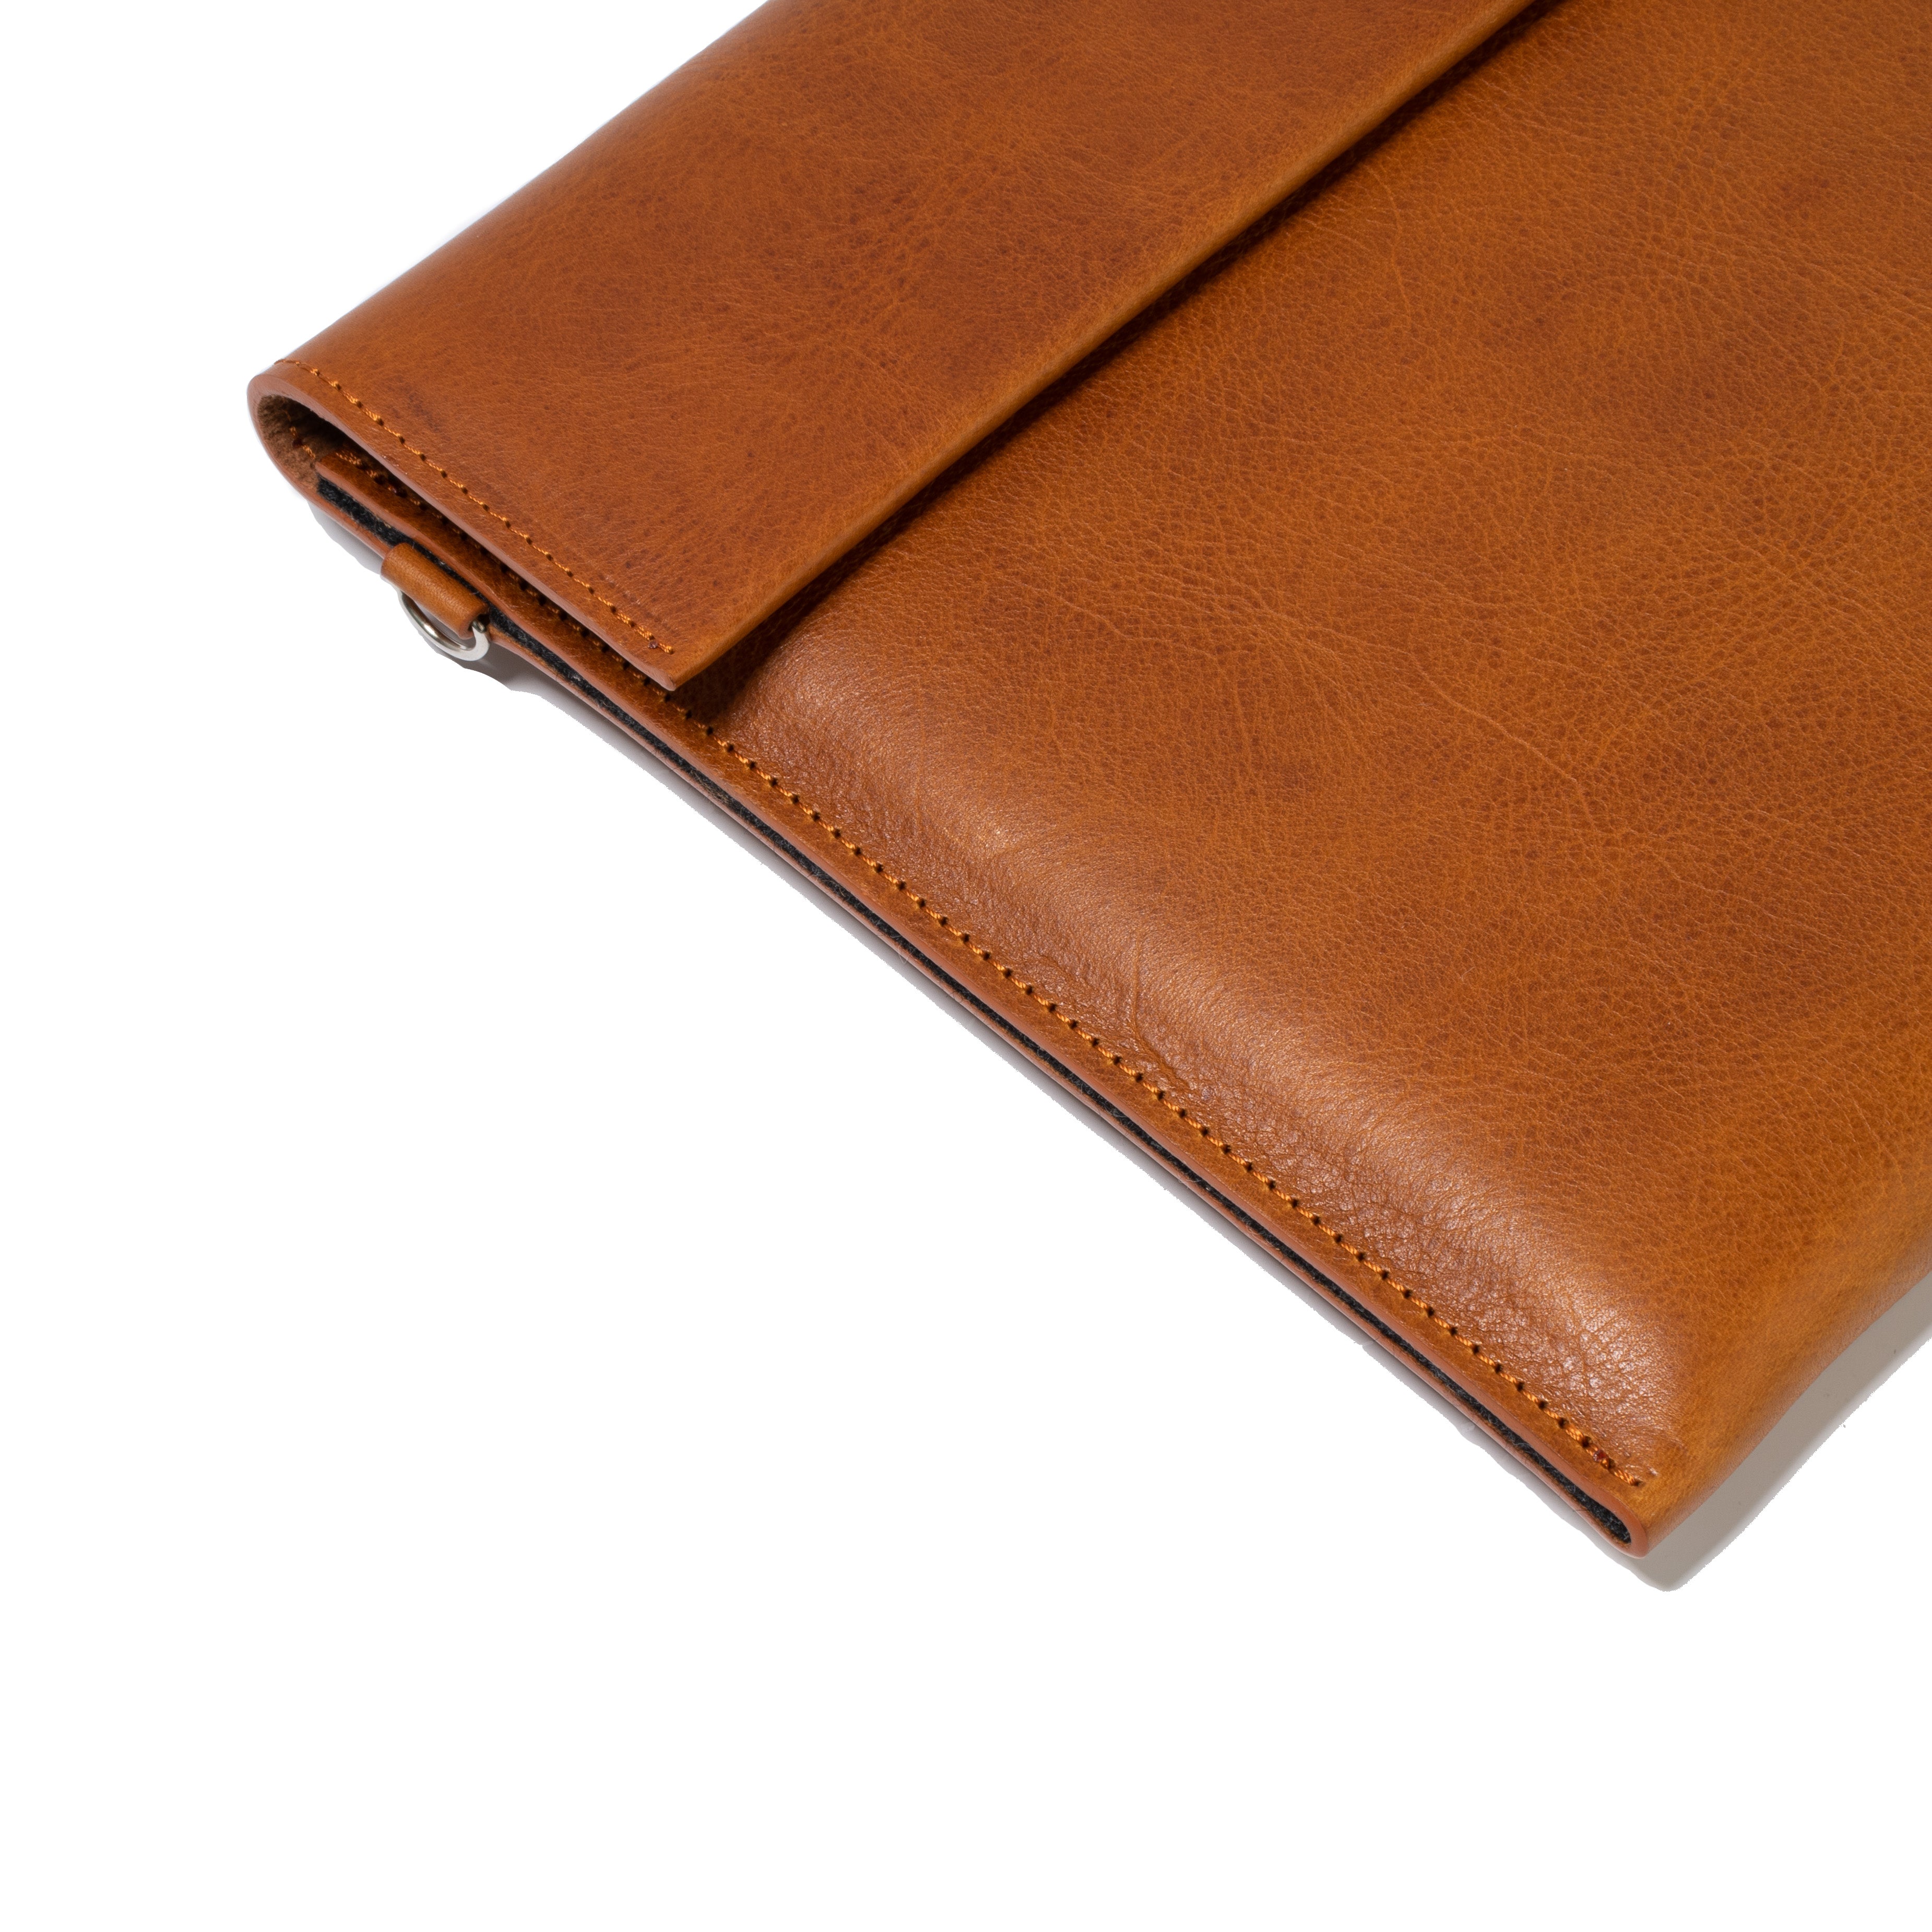 Leather iPad Pro Bundle - Messenger Bag with Folio by MacCase